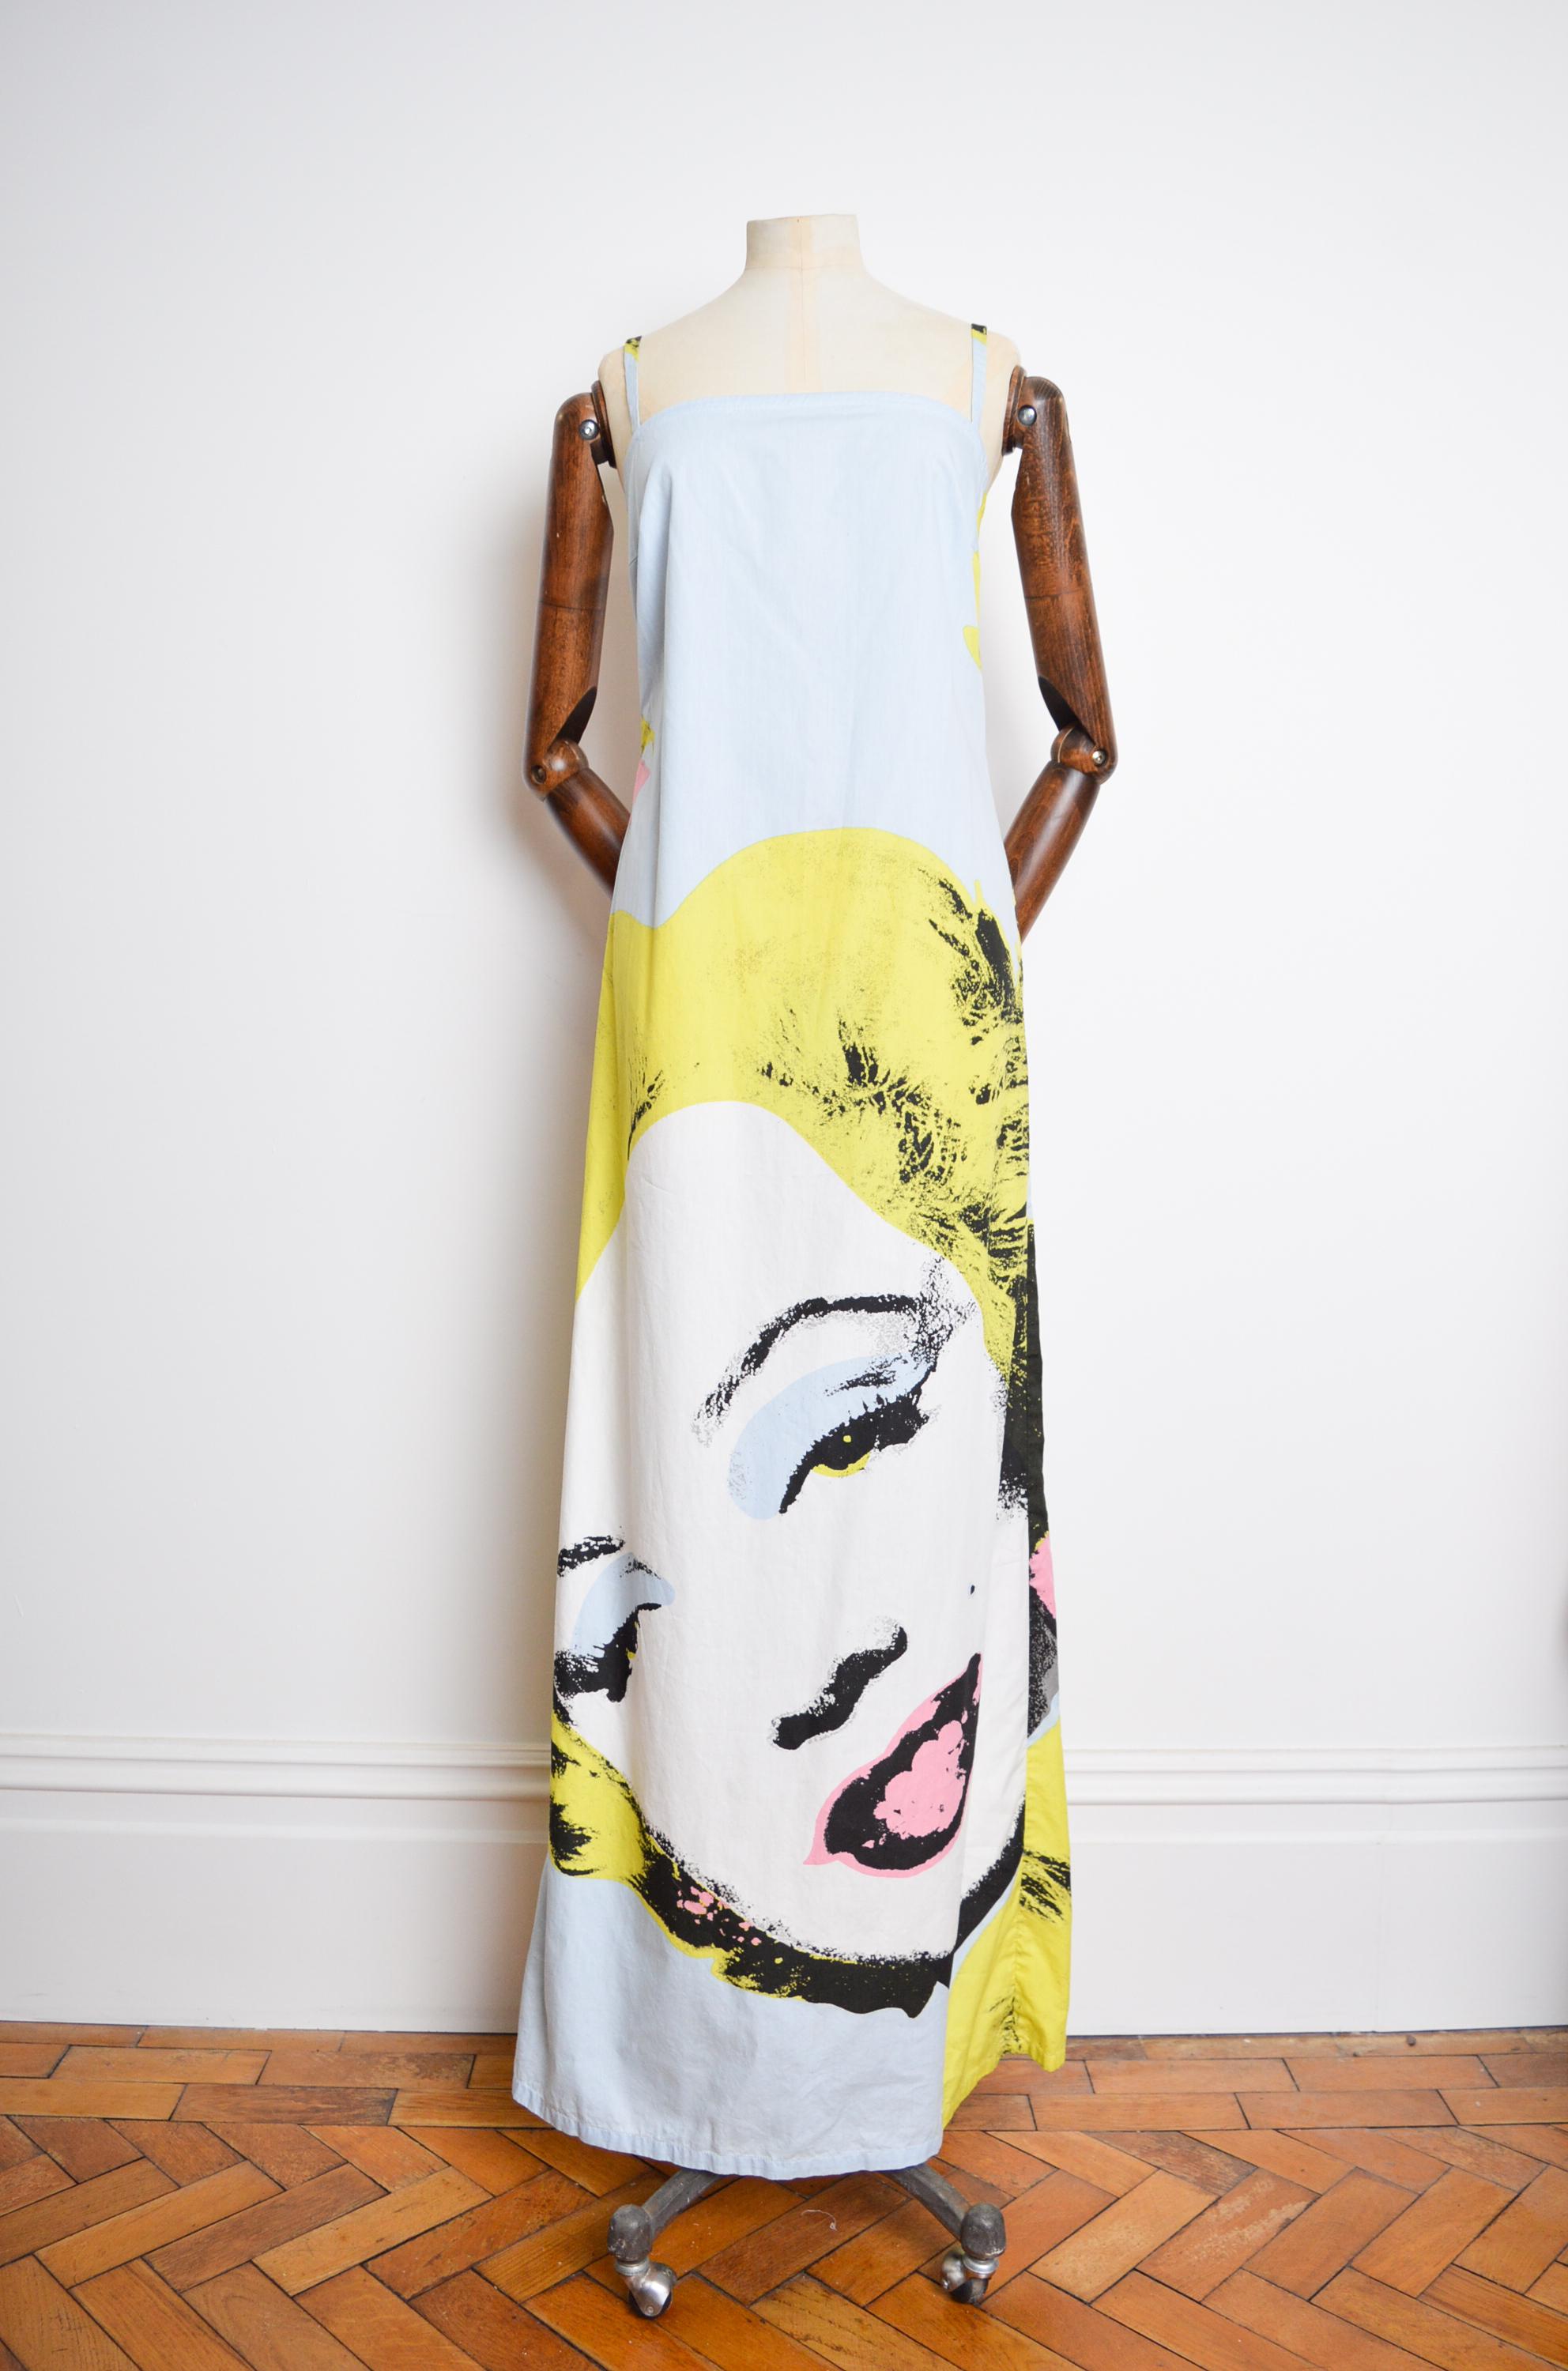 Spring /Summer 2000 ICEBERG, Pastel Coloured Monroe pop-art Dress designed by Jean Charles de Castelbajac.

MADE IN ITALY.

The Dress features Spaghetti strap shoulders, A-line shape, Concealed zip up back, Andy Warhol Printed front and reverse,